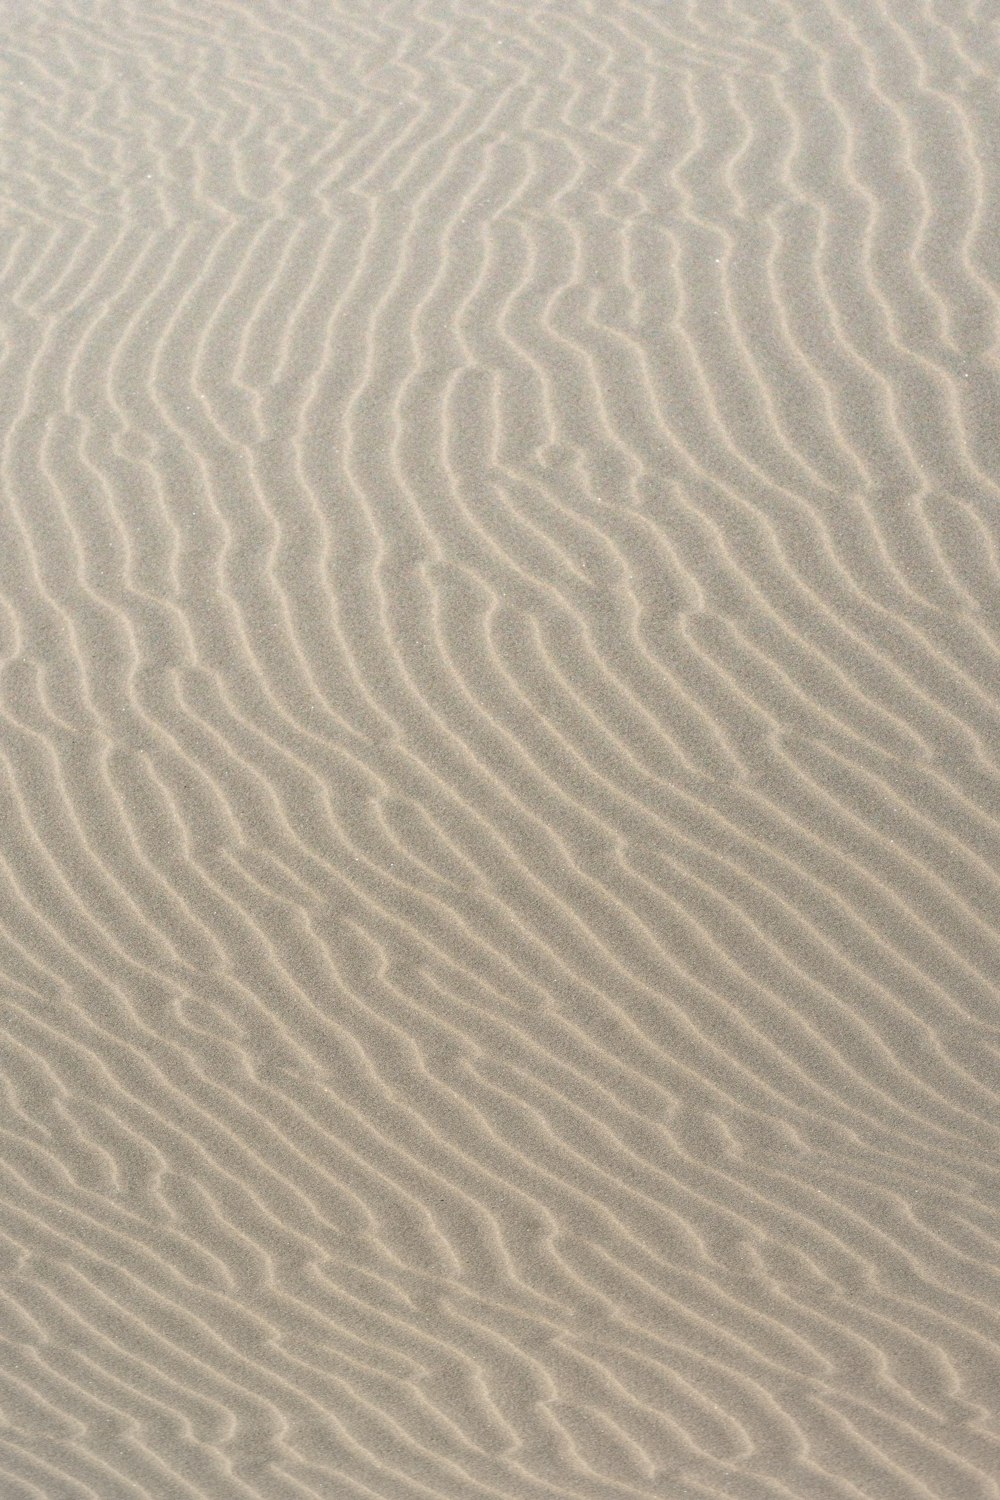 a large area of sand